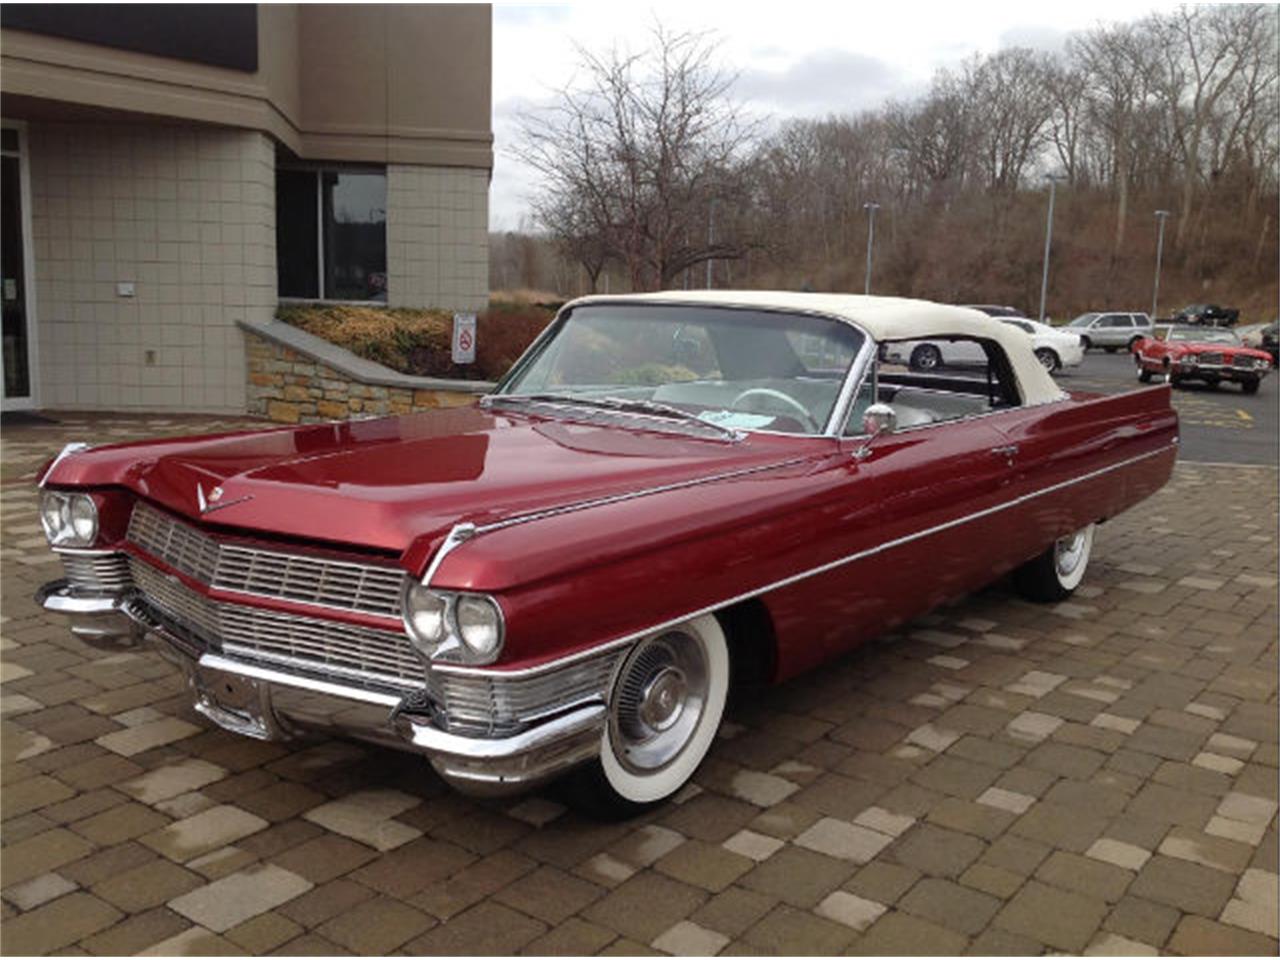 For Sale: 1964 Cadillac Coupe DeVille in Milford, Ohio.